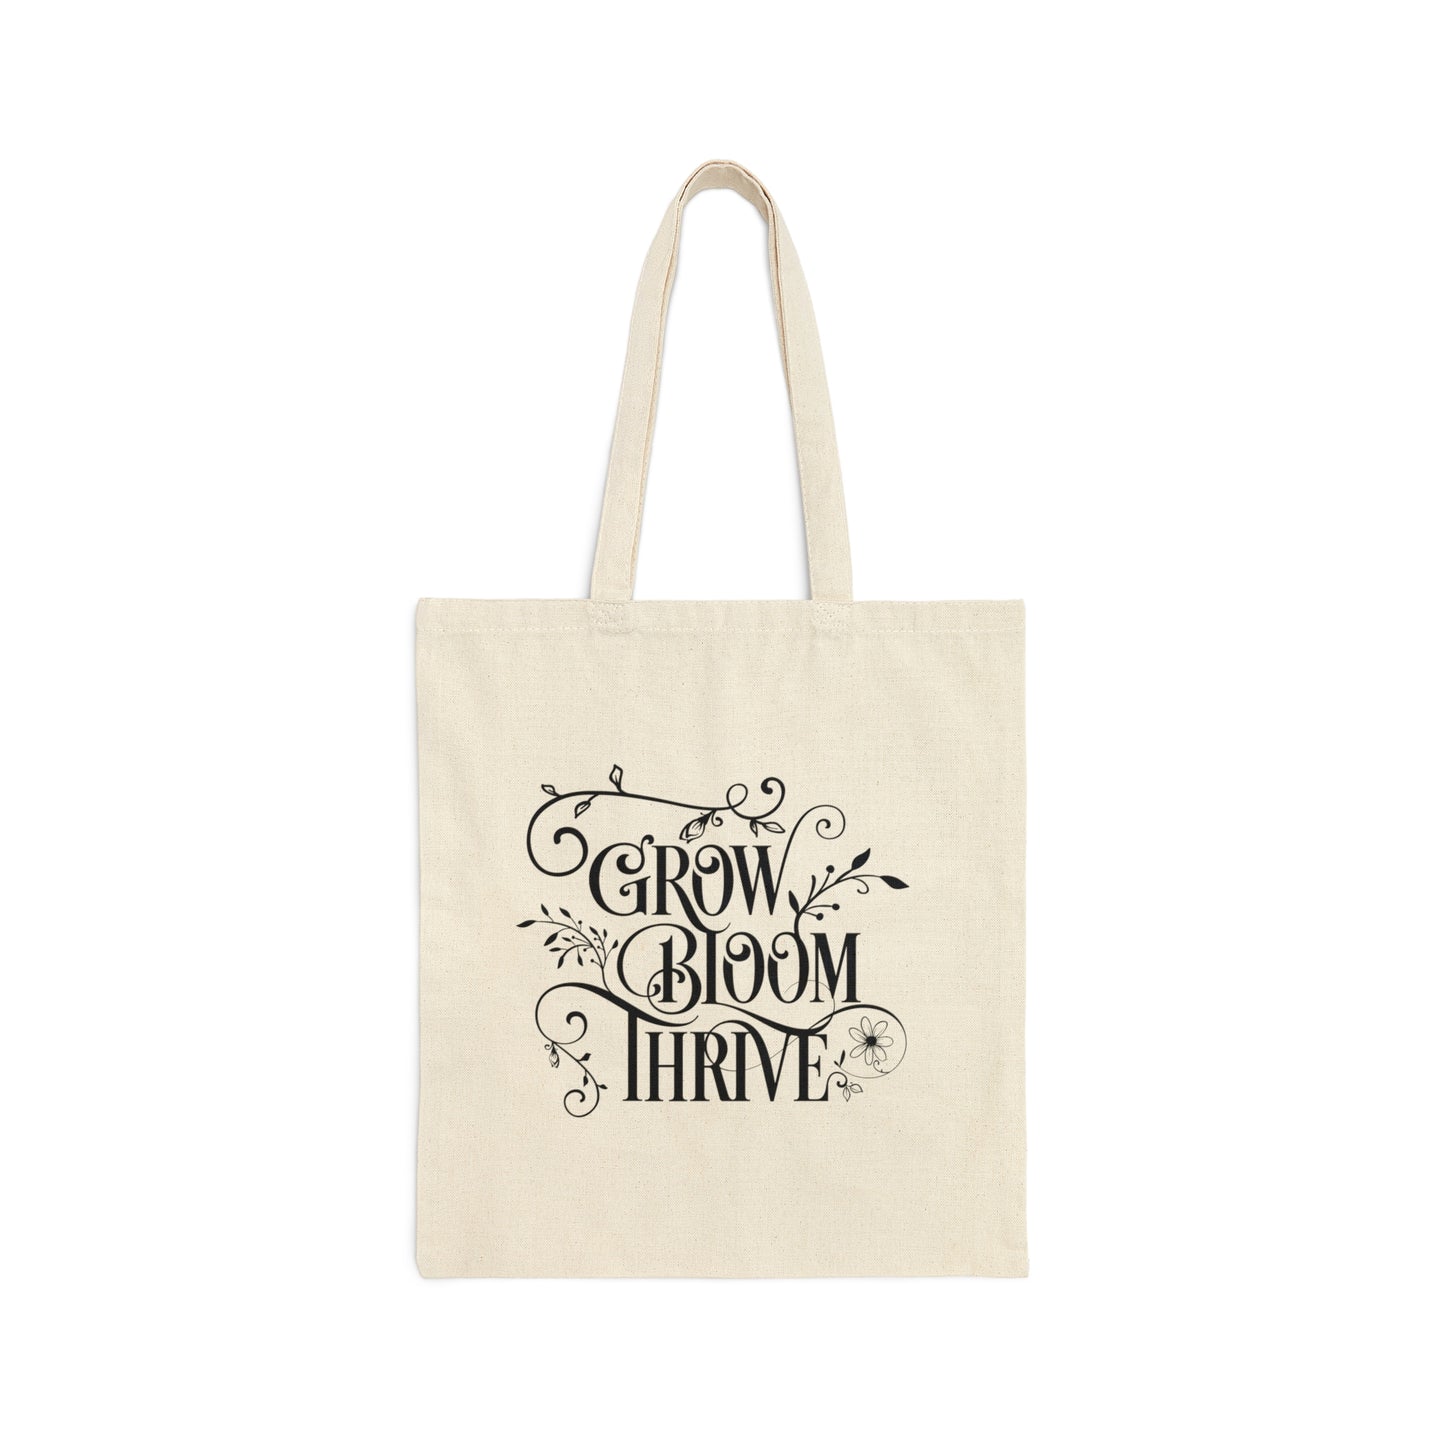 Grow Bloom Thrive Gardener's Shopping Canvas Tote Bag